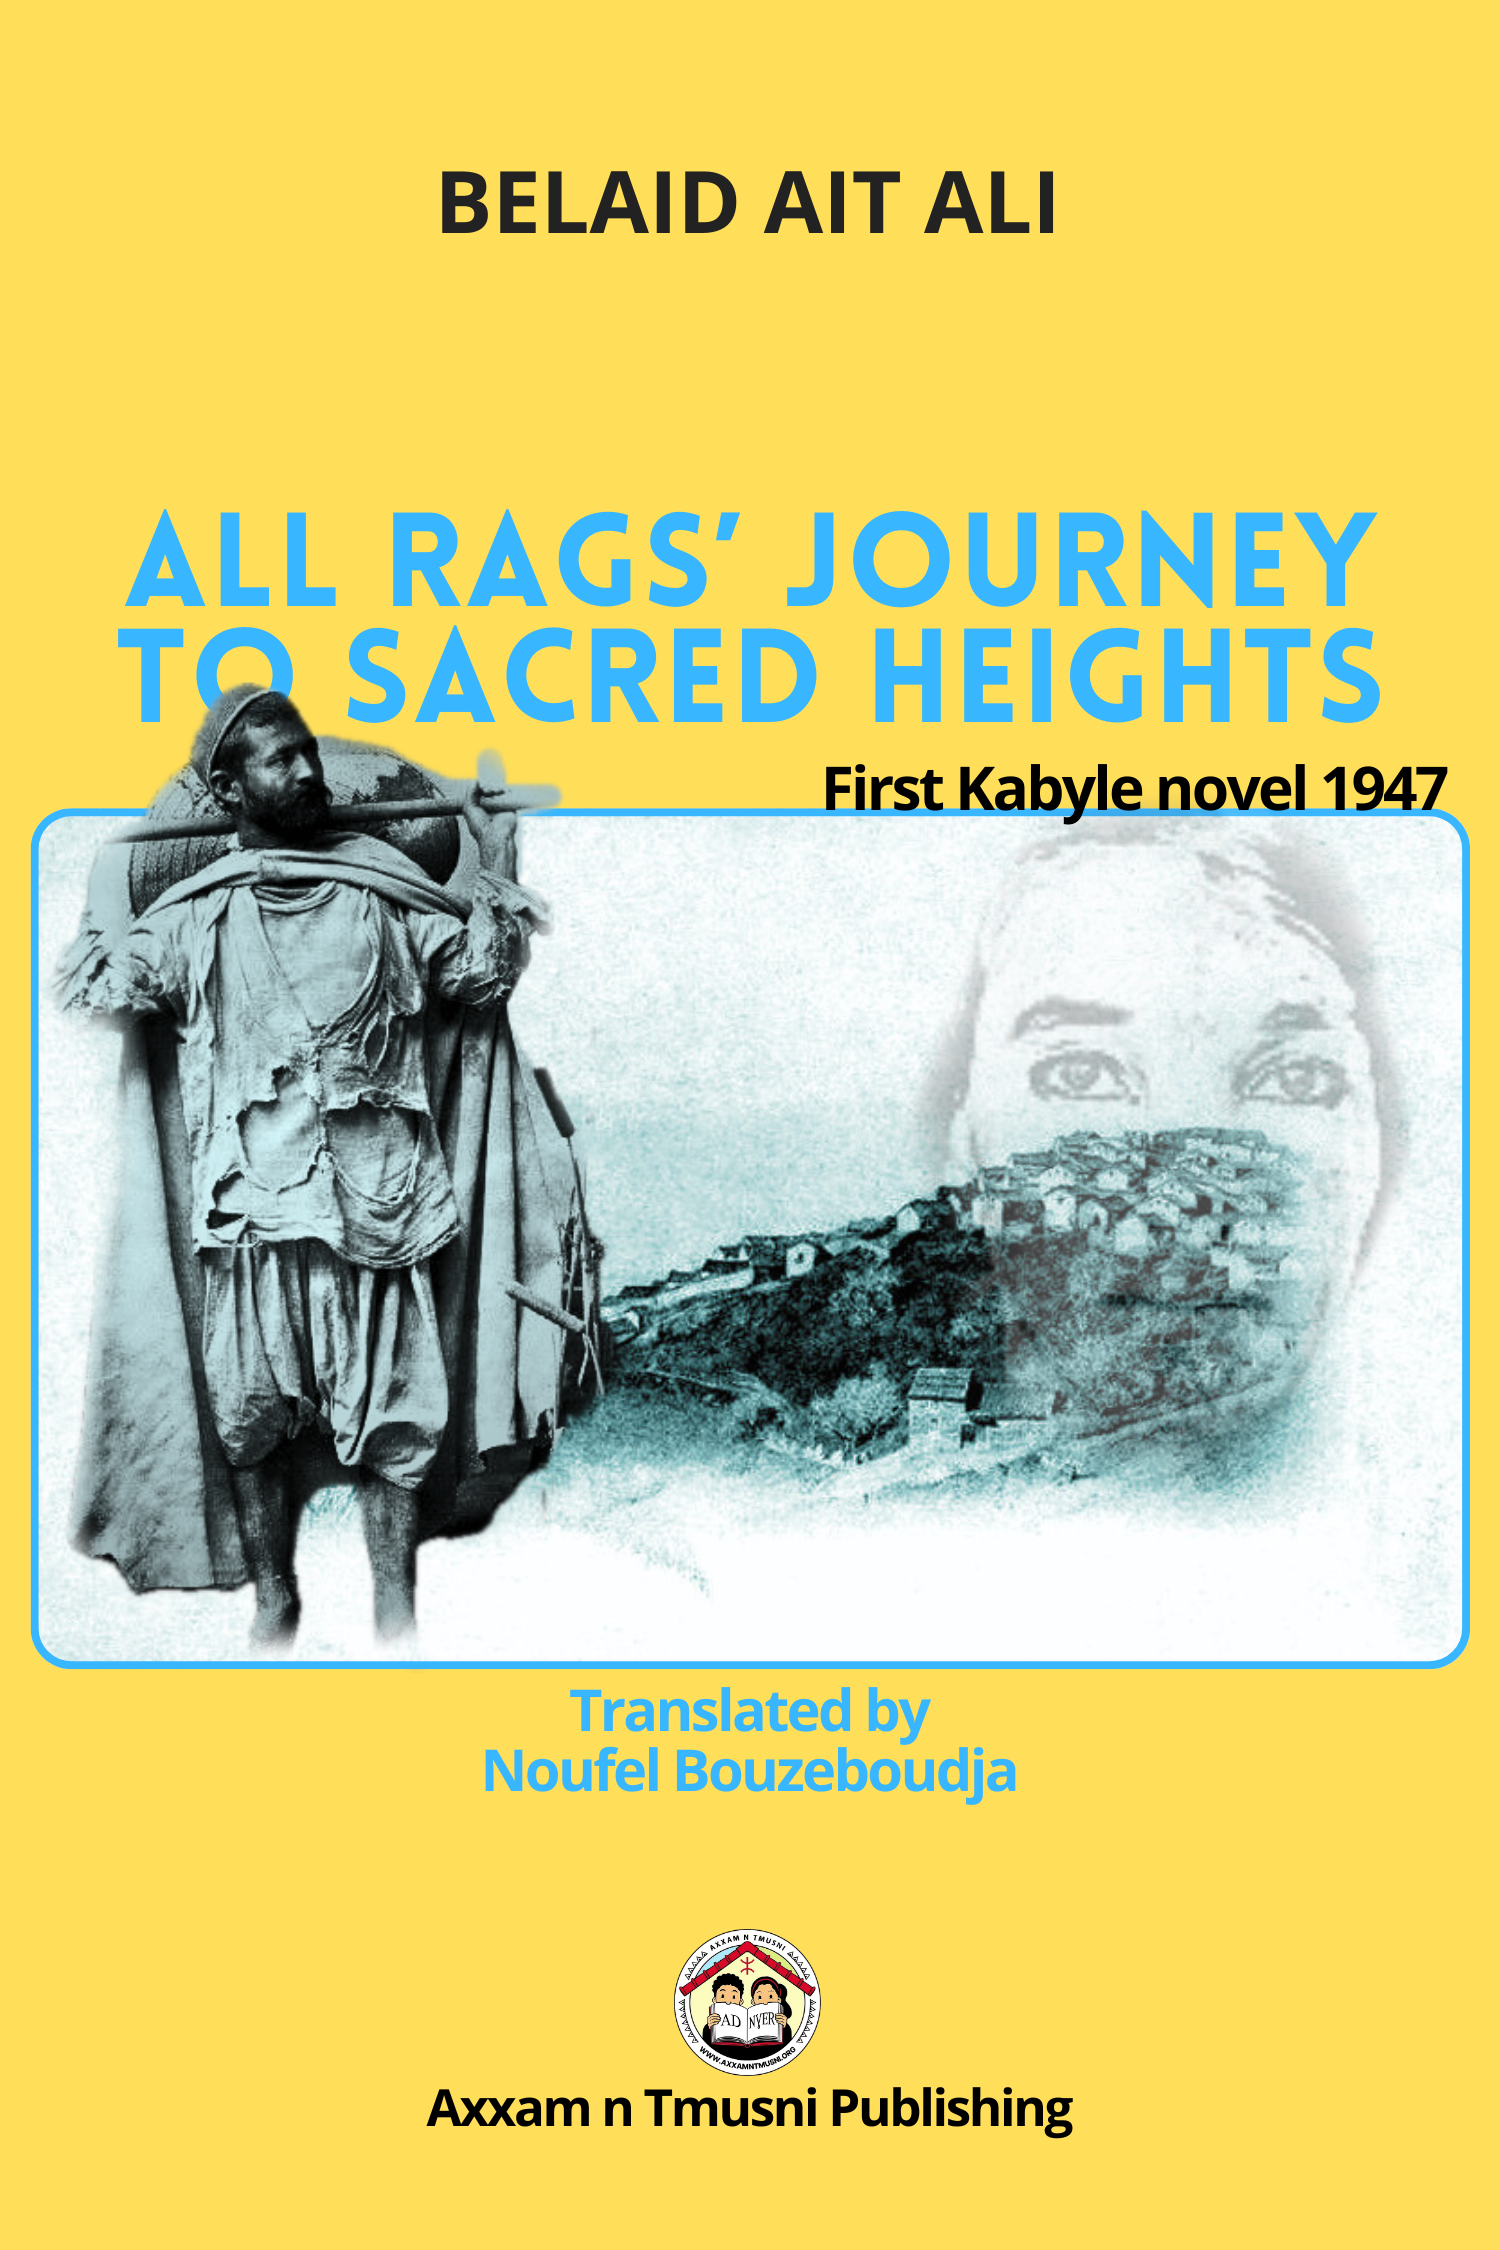 All Rags' Journey to Sacred Heights